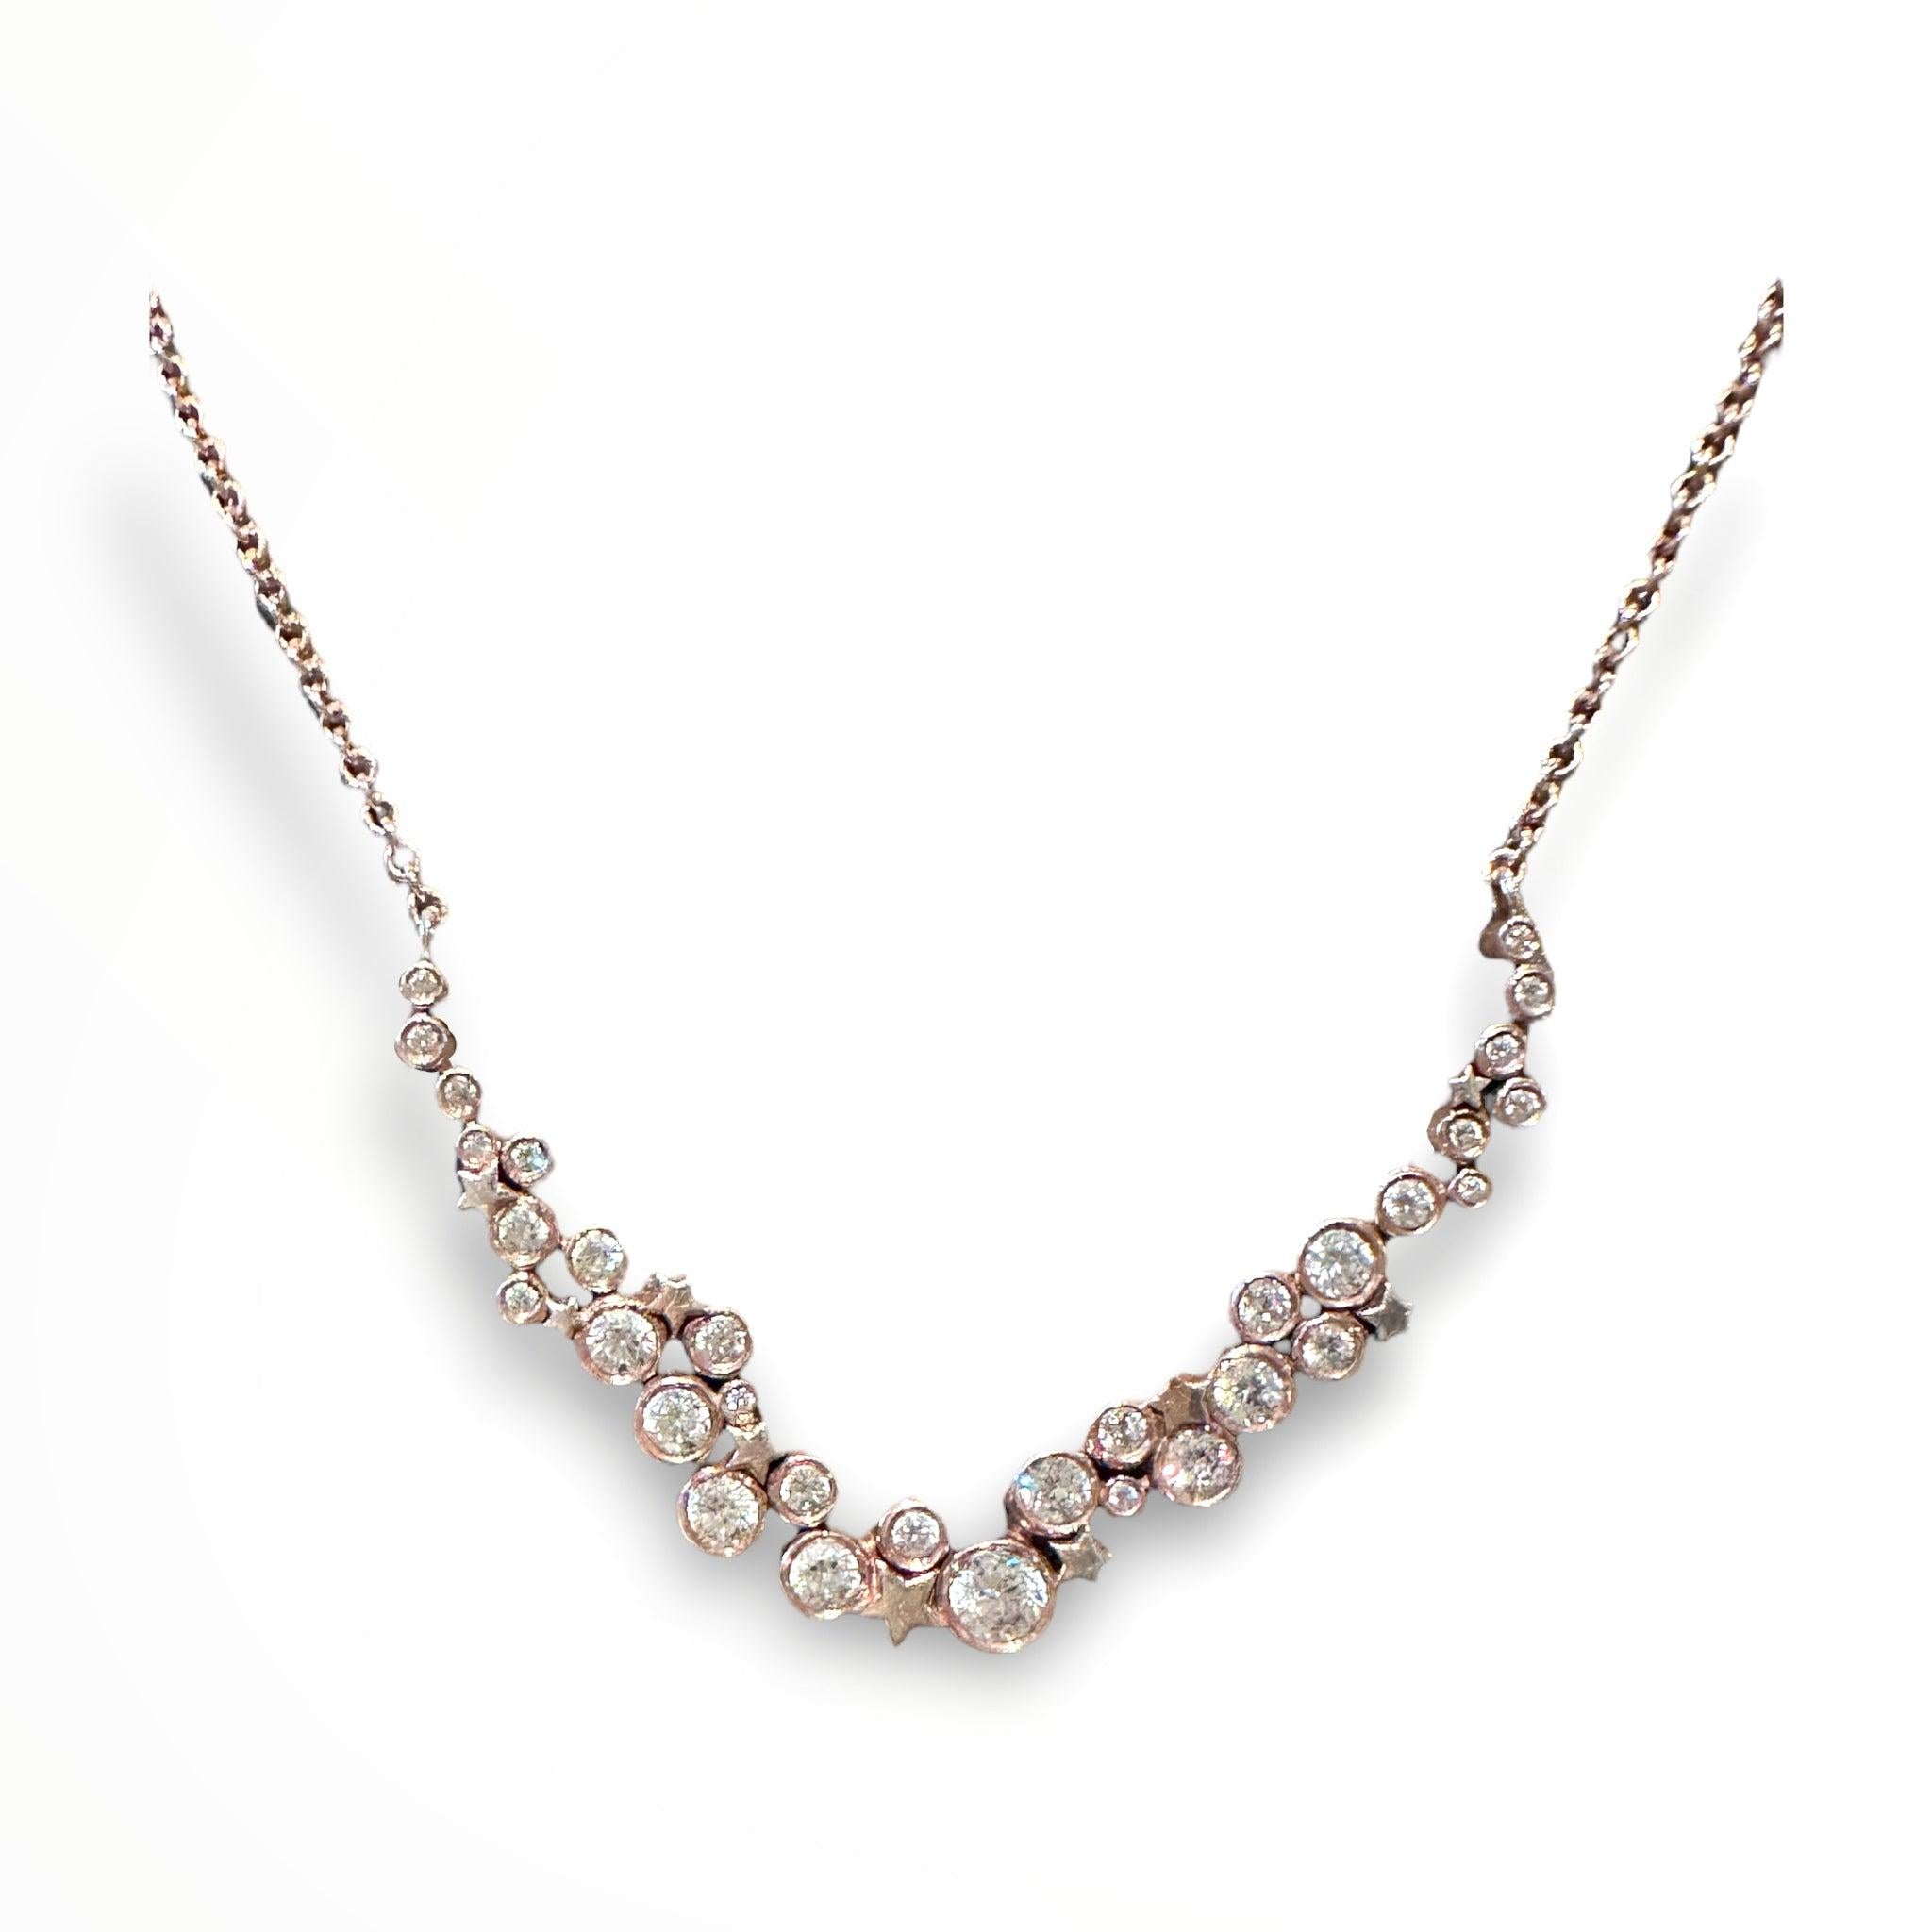 Women's Cyclades Diamond Constellation Necklace in Gold